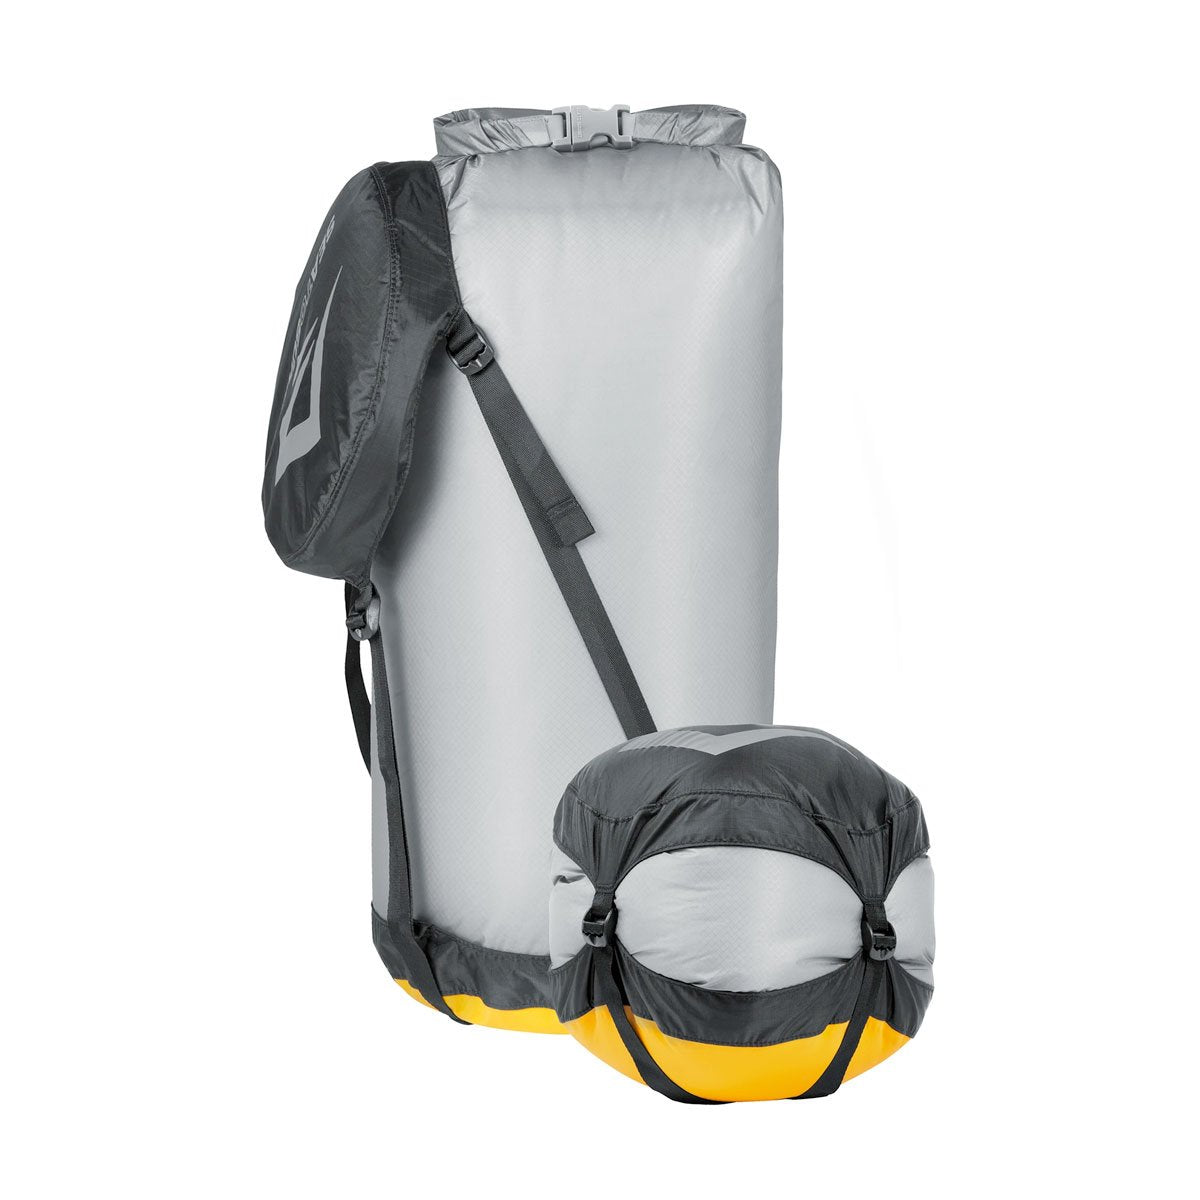 Sea to Summit Ultra-Sil Event Dry Compression Sack 3.3L/6L/10L/14L/20L Bags, Packs and Cases Sea To Summit Medium / 14 Liter Tactical Gear Supplier Tactical Distributors Australia